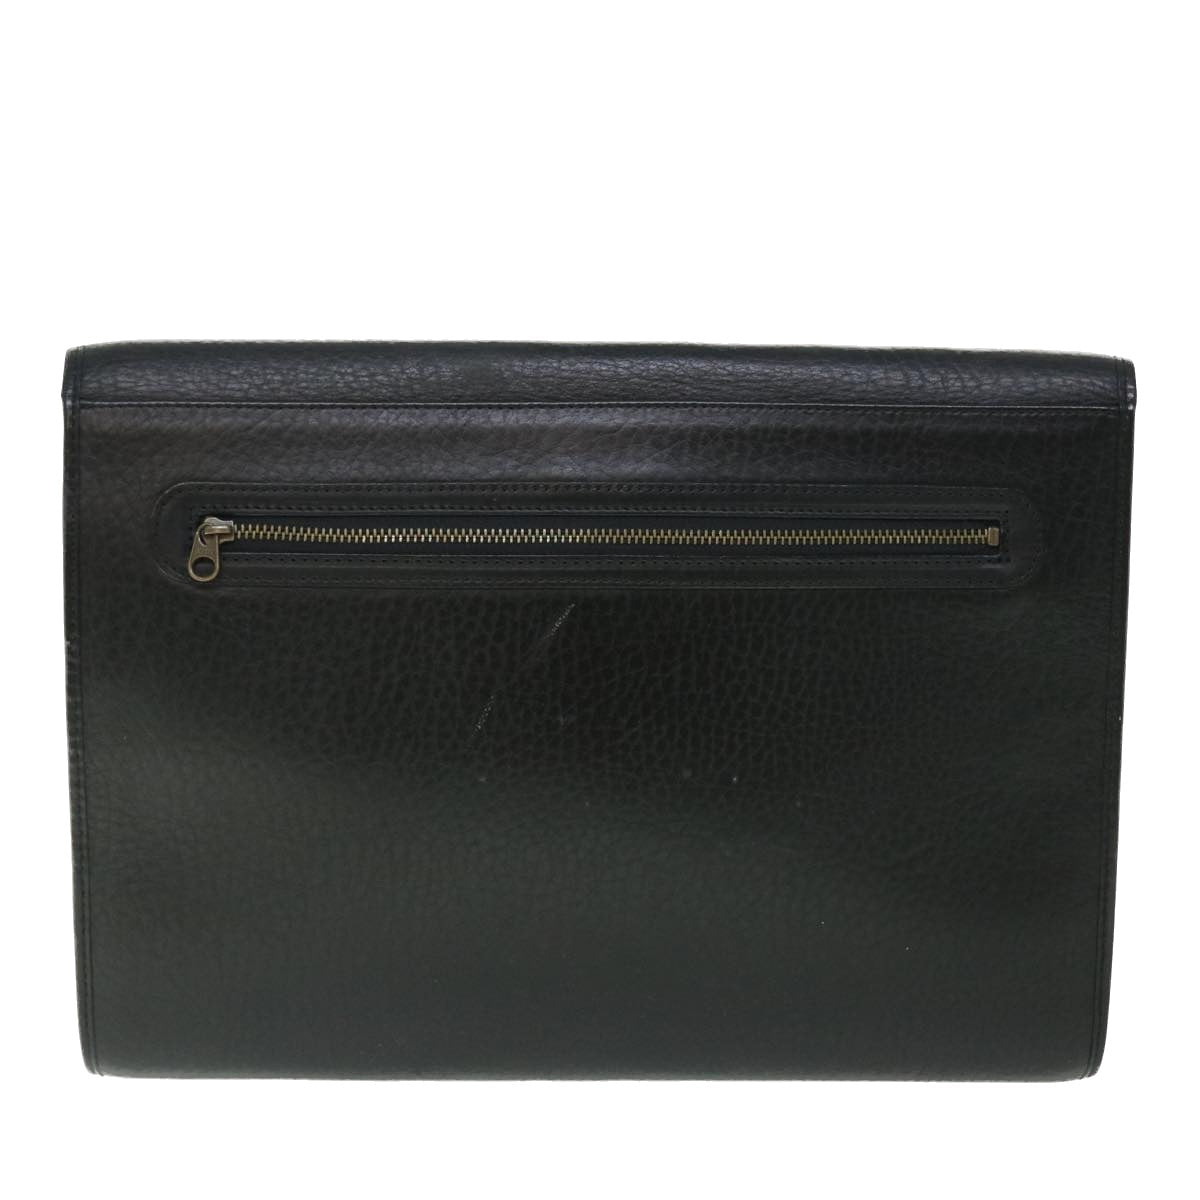 Burberrys Briefcase Leather Black Auth bs7548 - 0